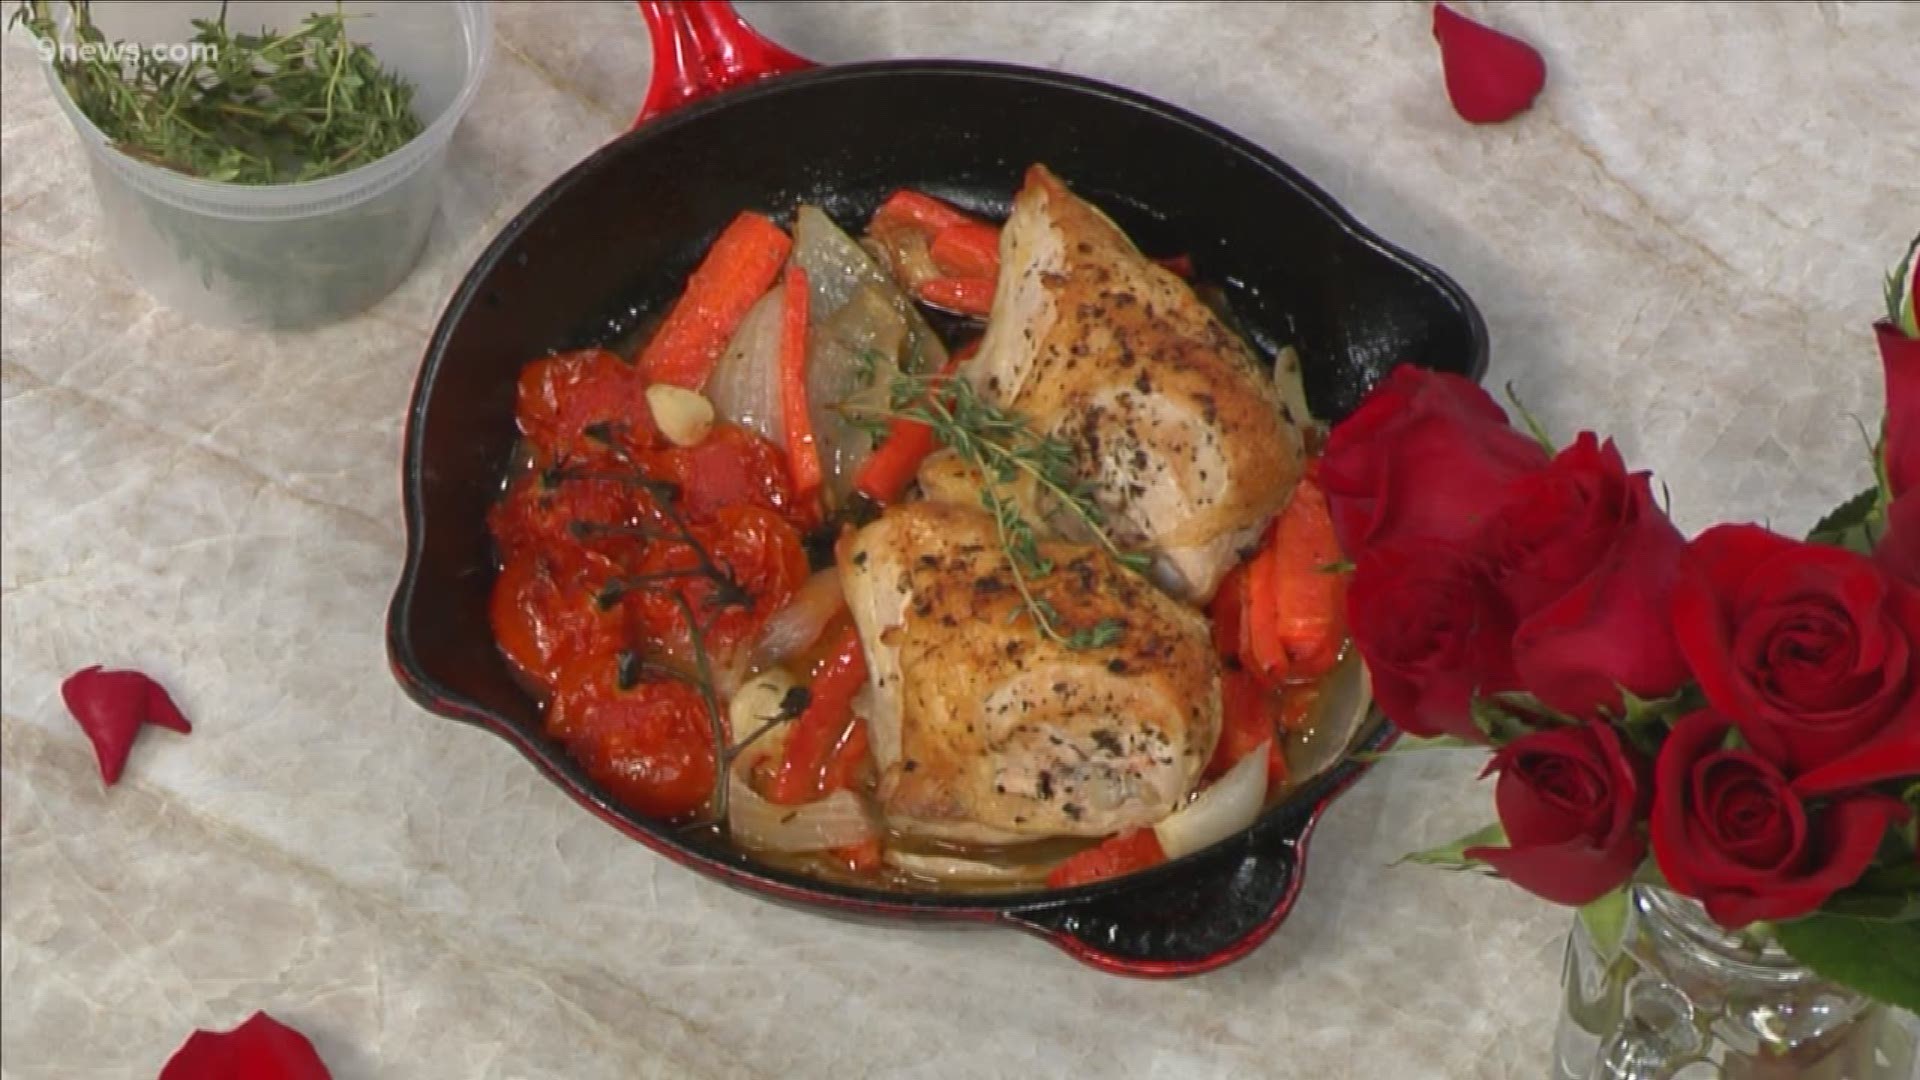 If you're thinking of cooking your sweetheart a special meal for Valentine's Day, there are ways to do it on a budget. Chef Emma Nemecheck joins us with some ideas.